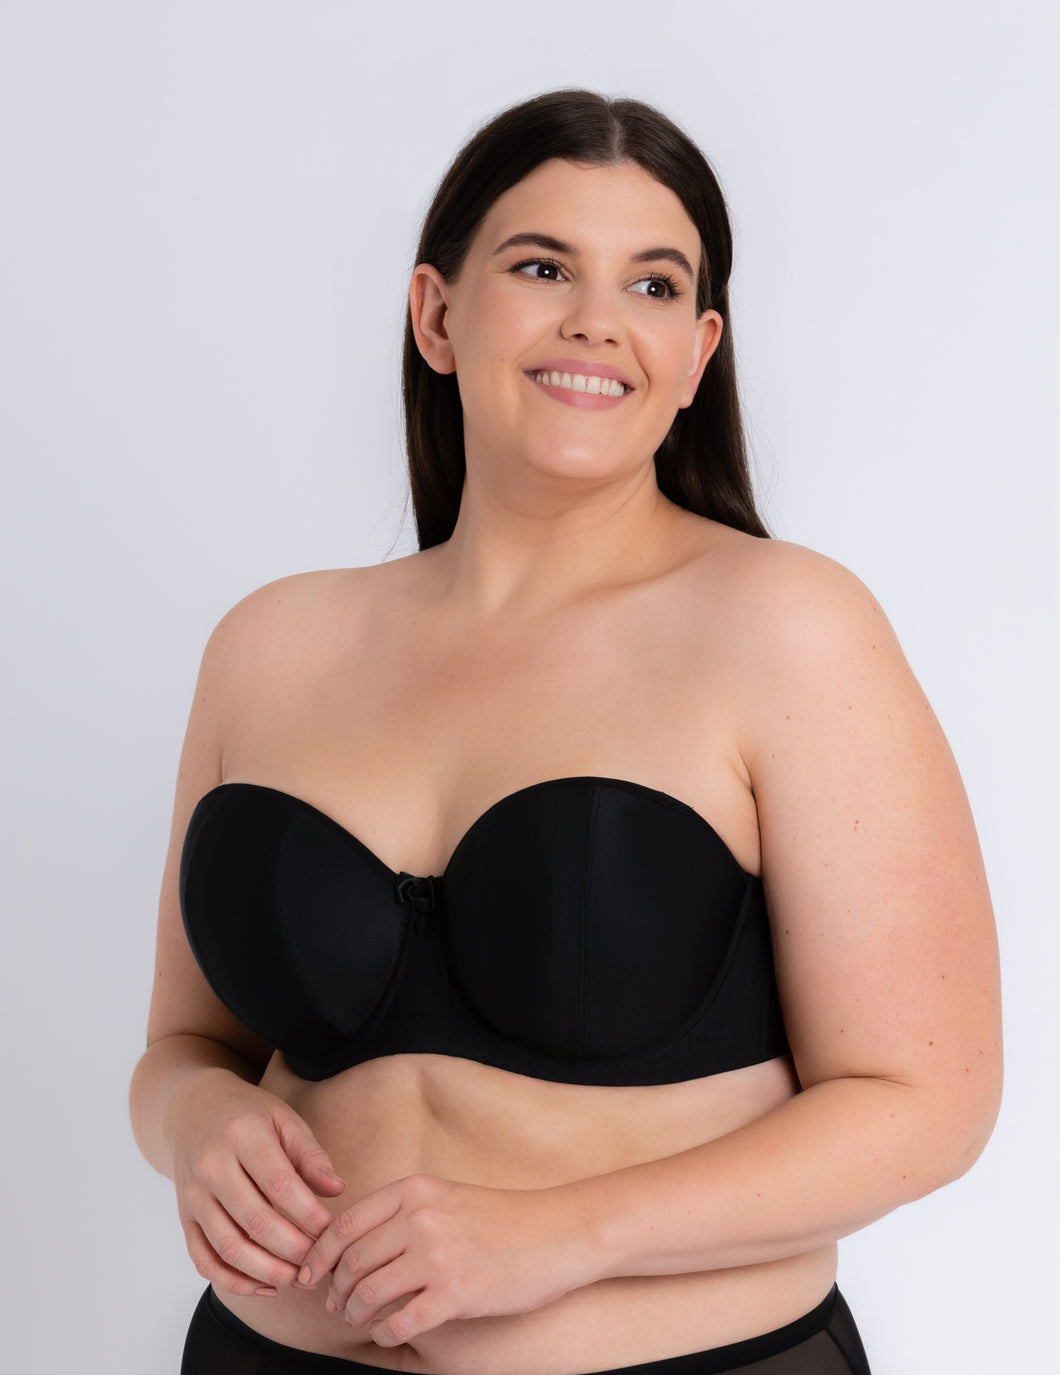 Luxe strapless - Curvy Kate - copy-of-luxe-multiway-strapless - The Pencil Test - Curvy Kate